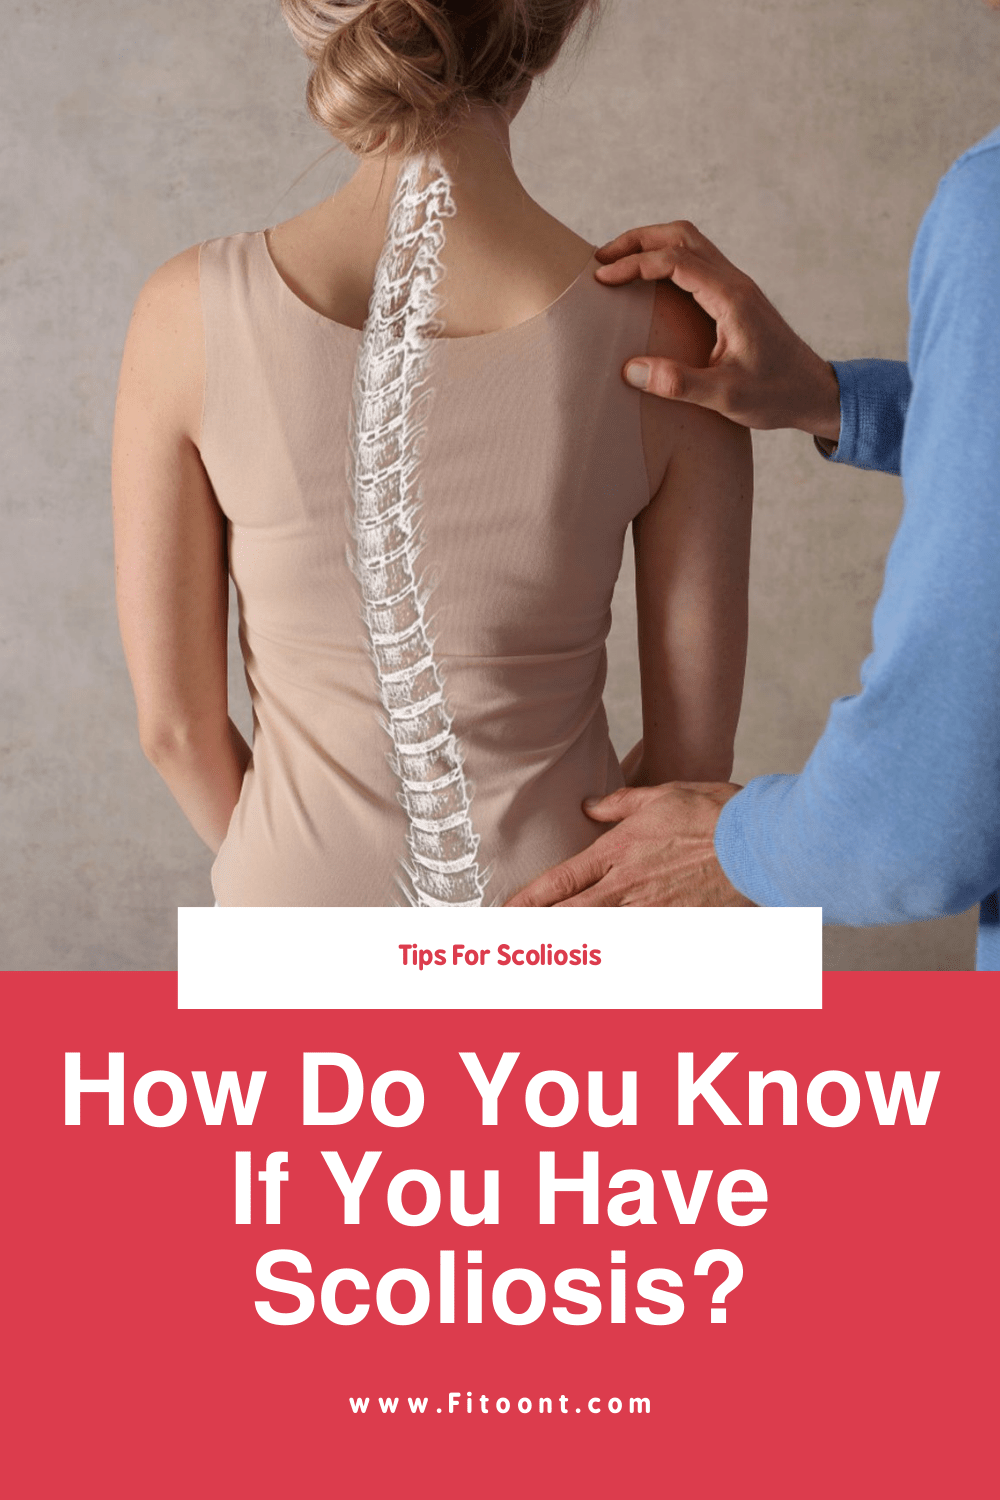 How do you know if you have scoliosis